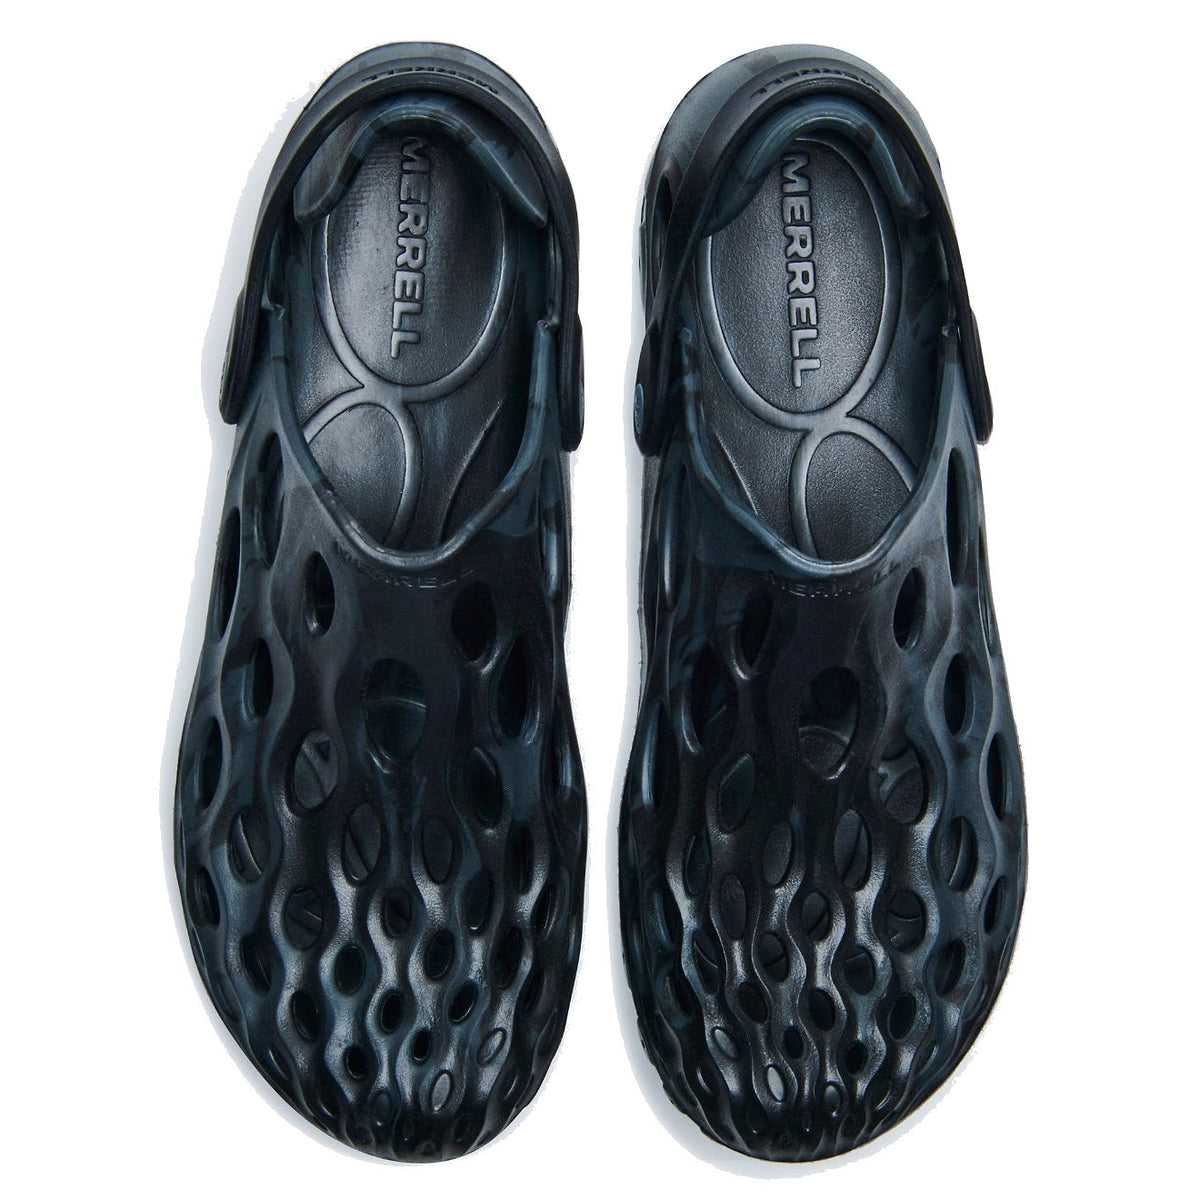 A pair of black Merrell Hydro Moc slip-on shoes with a unique open design, viewed from above.